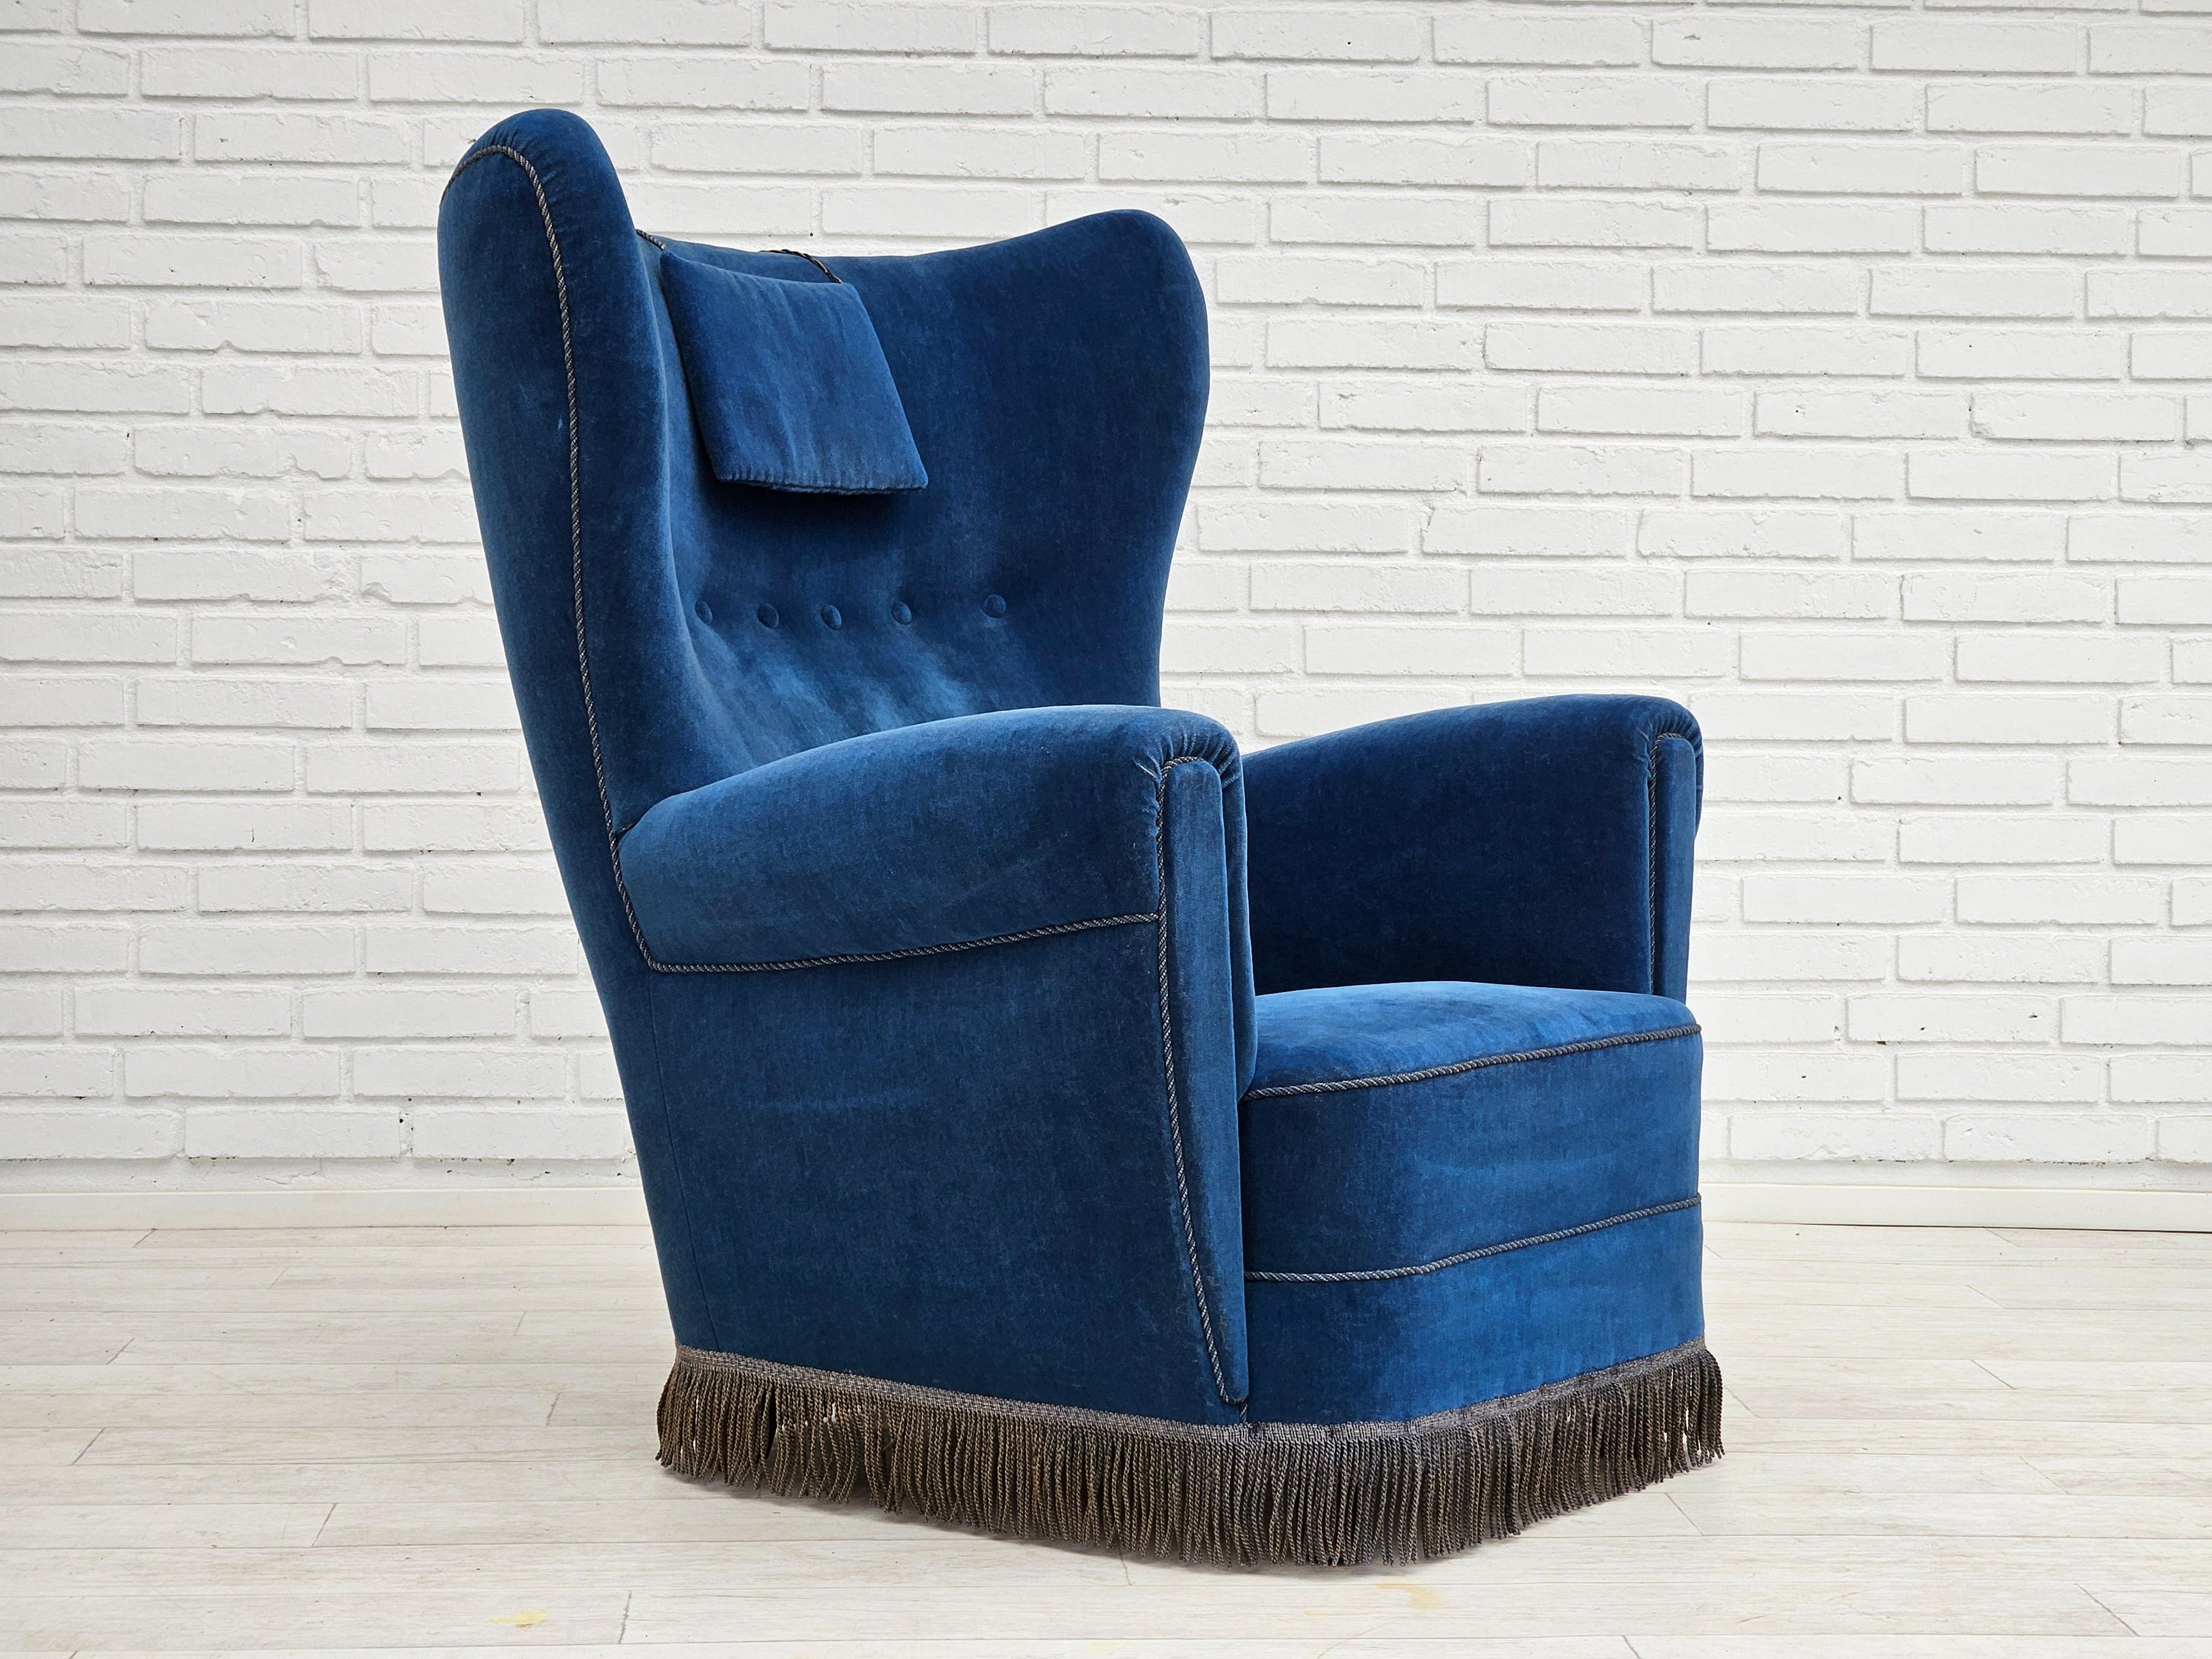 1960s, Danish high back relax chair in original very good condition: no smells and no stains. Blue furniture velour, beech wood legs, brass springs in the seat, neck pillow. Manufactured by Danish furniture manufacturer in about 1960-65s.